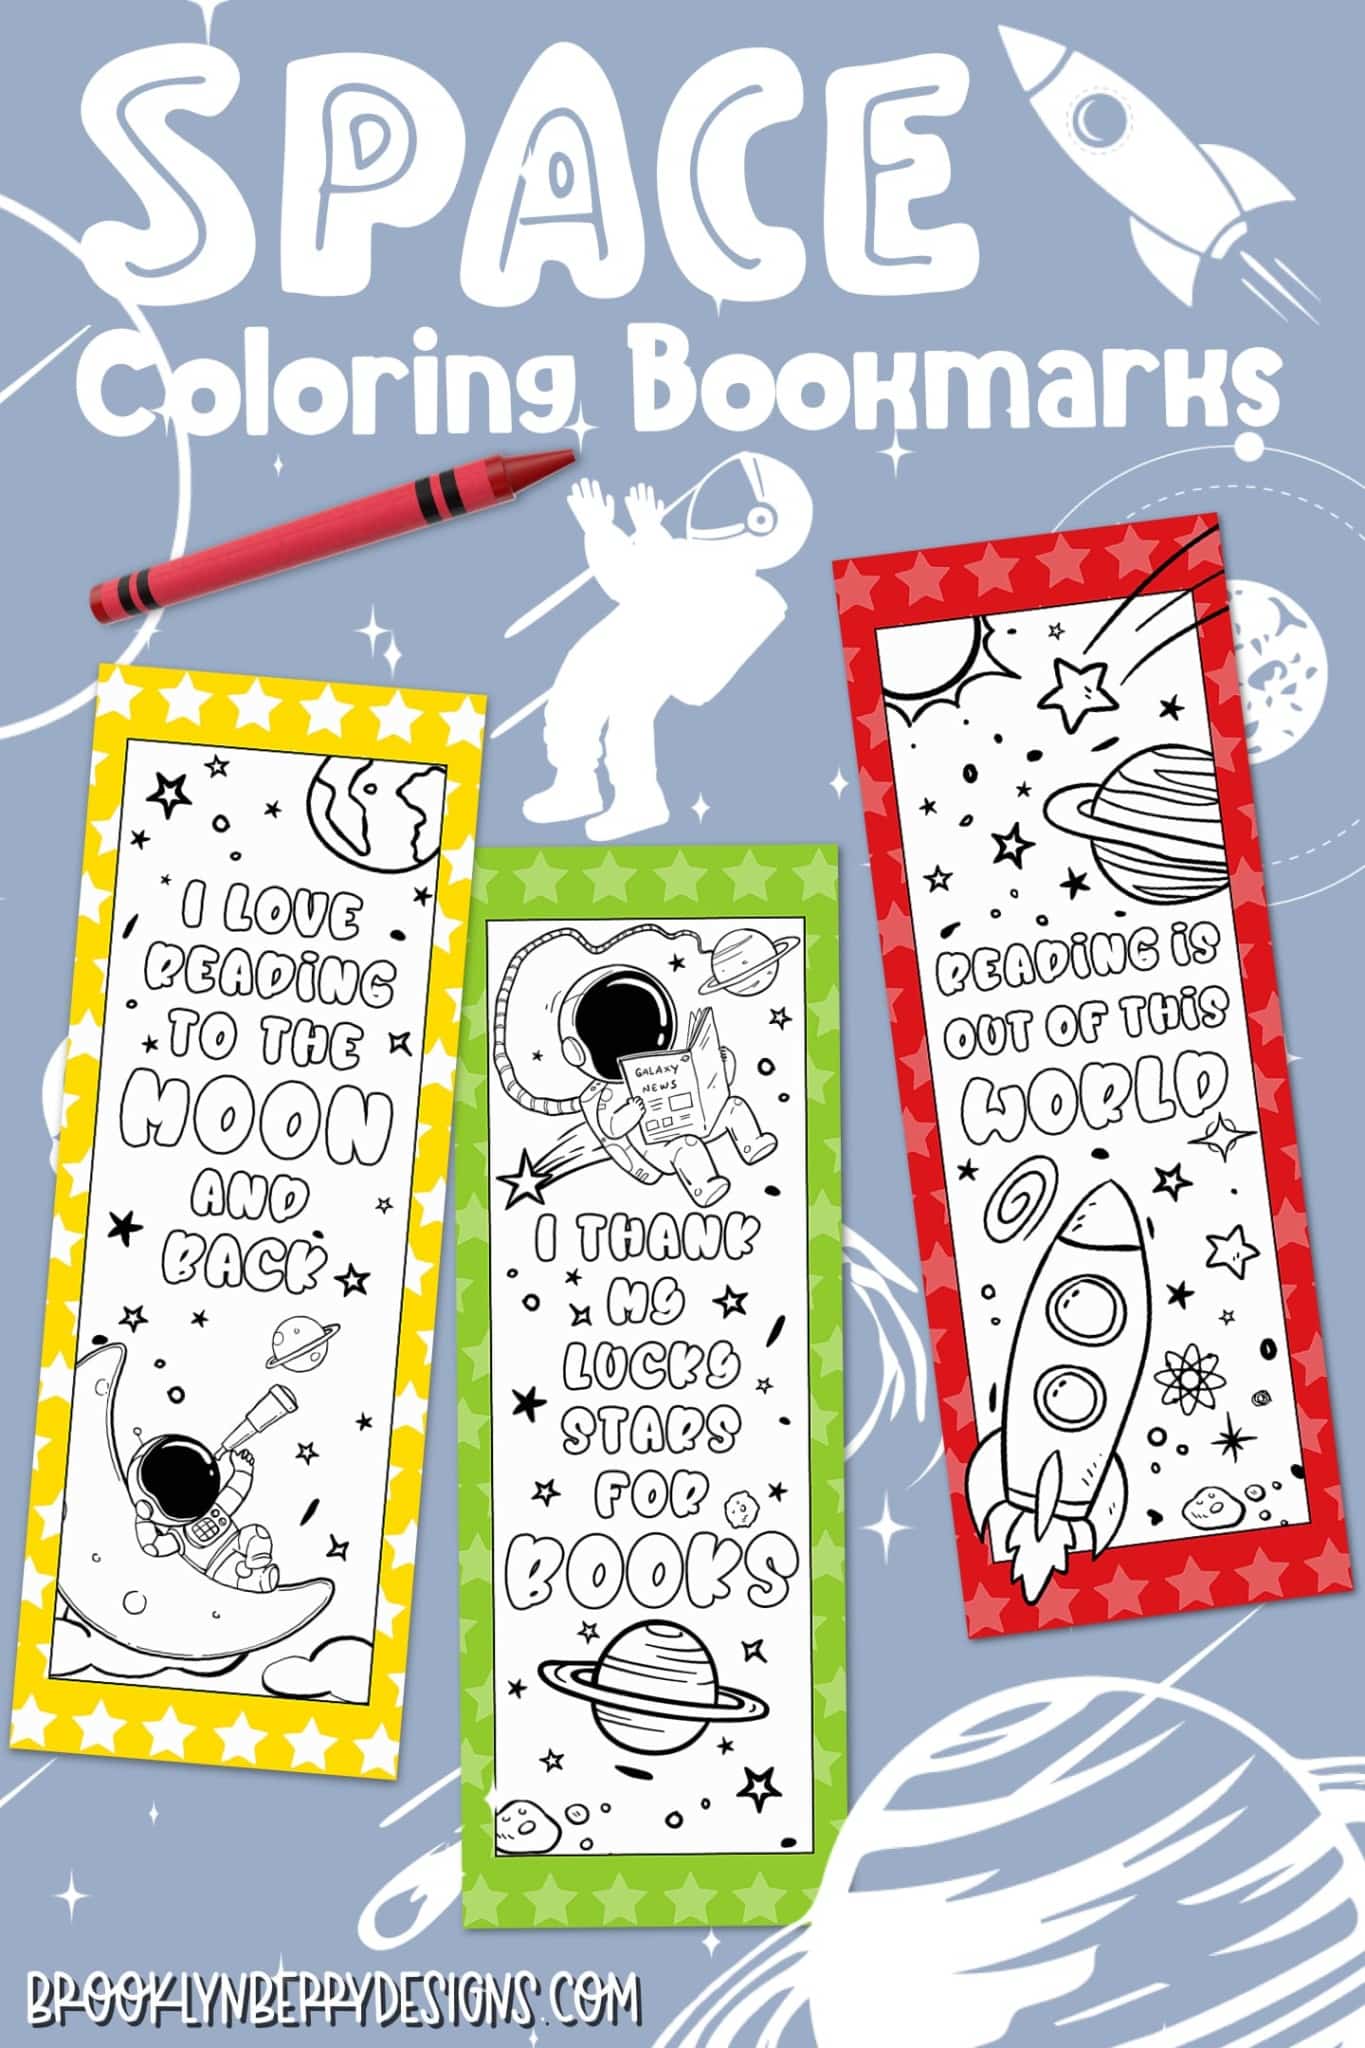 Free Space Coloring Bookmarks - great for keeping kids entertained while learning at home. via @brookeberry